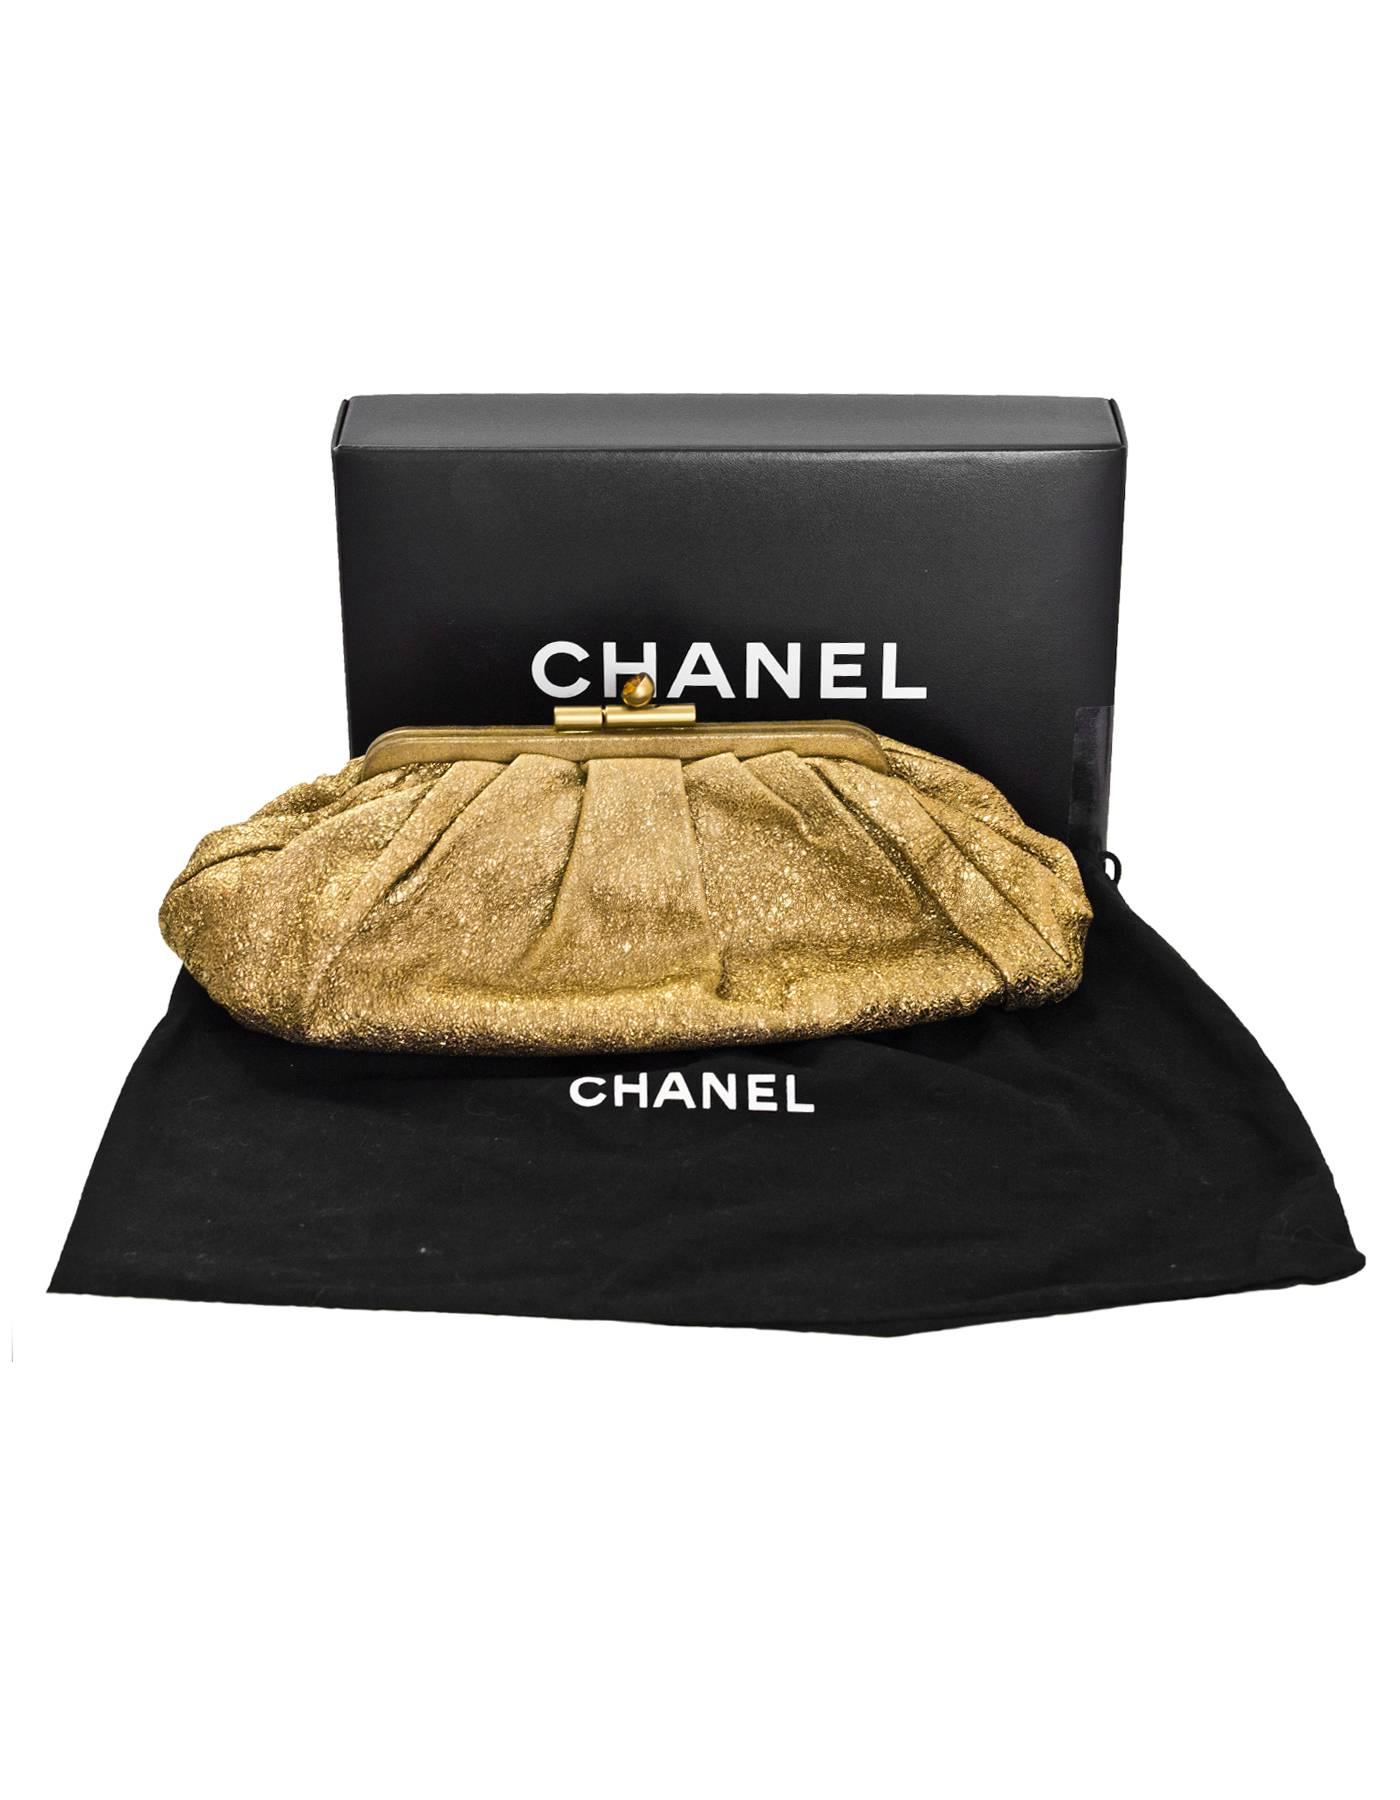 Chanel Gold Crackled Leather Clutch Bag with Box & Dust Bag 2